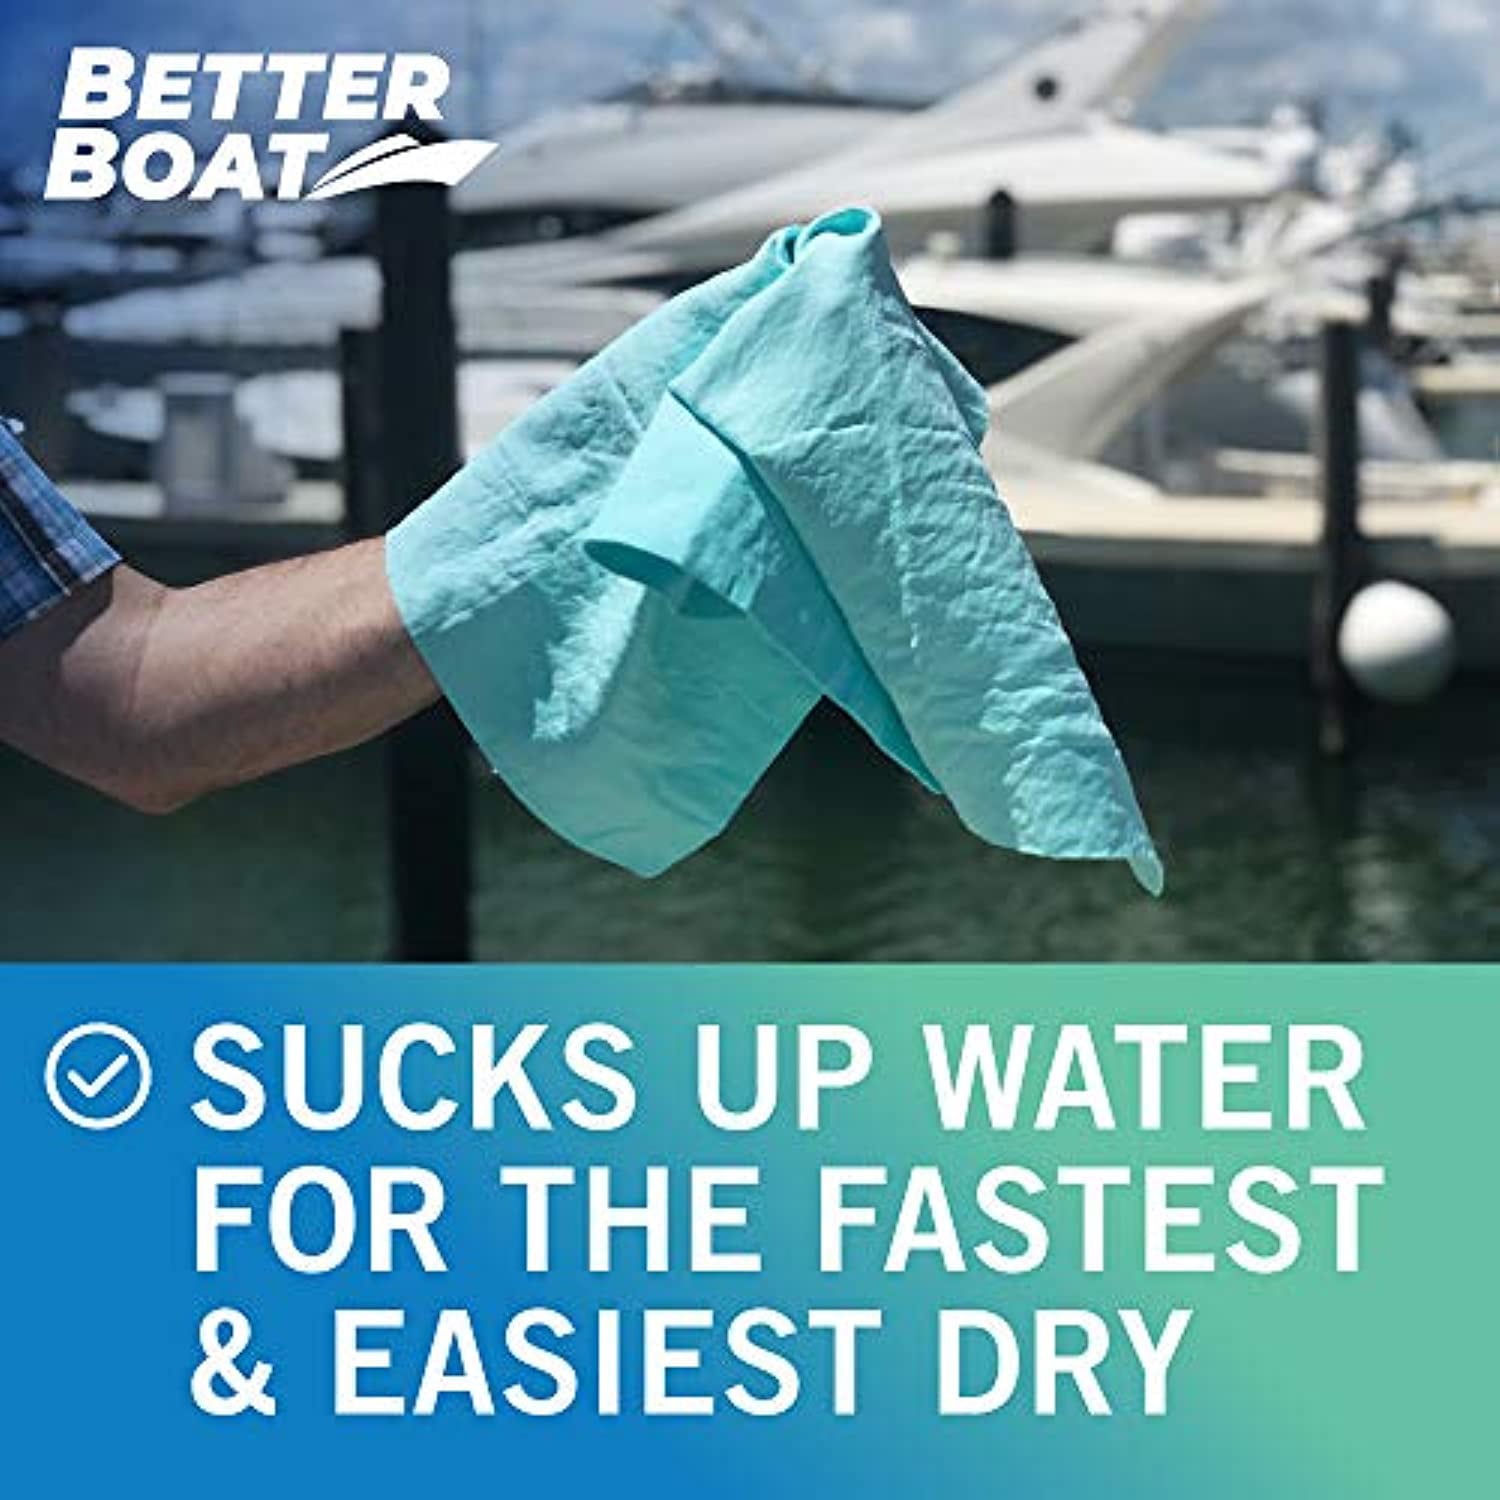 Super Absorbent Towels Drying Chamois Cloth Synthetic Smooth Boat Cooling  Towel Shammy Towel for Car Drying Towel Marine Grade Car Towel Cleaning  Supplies Wash Chamois Towel Dry PVA Dry Dry Polyvinyl Alcohol (